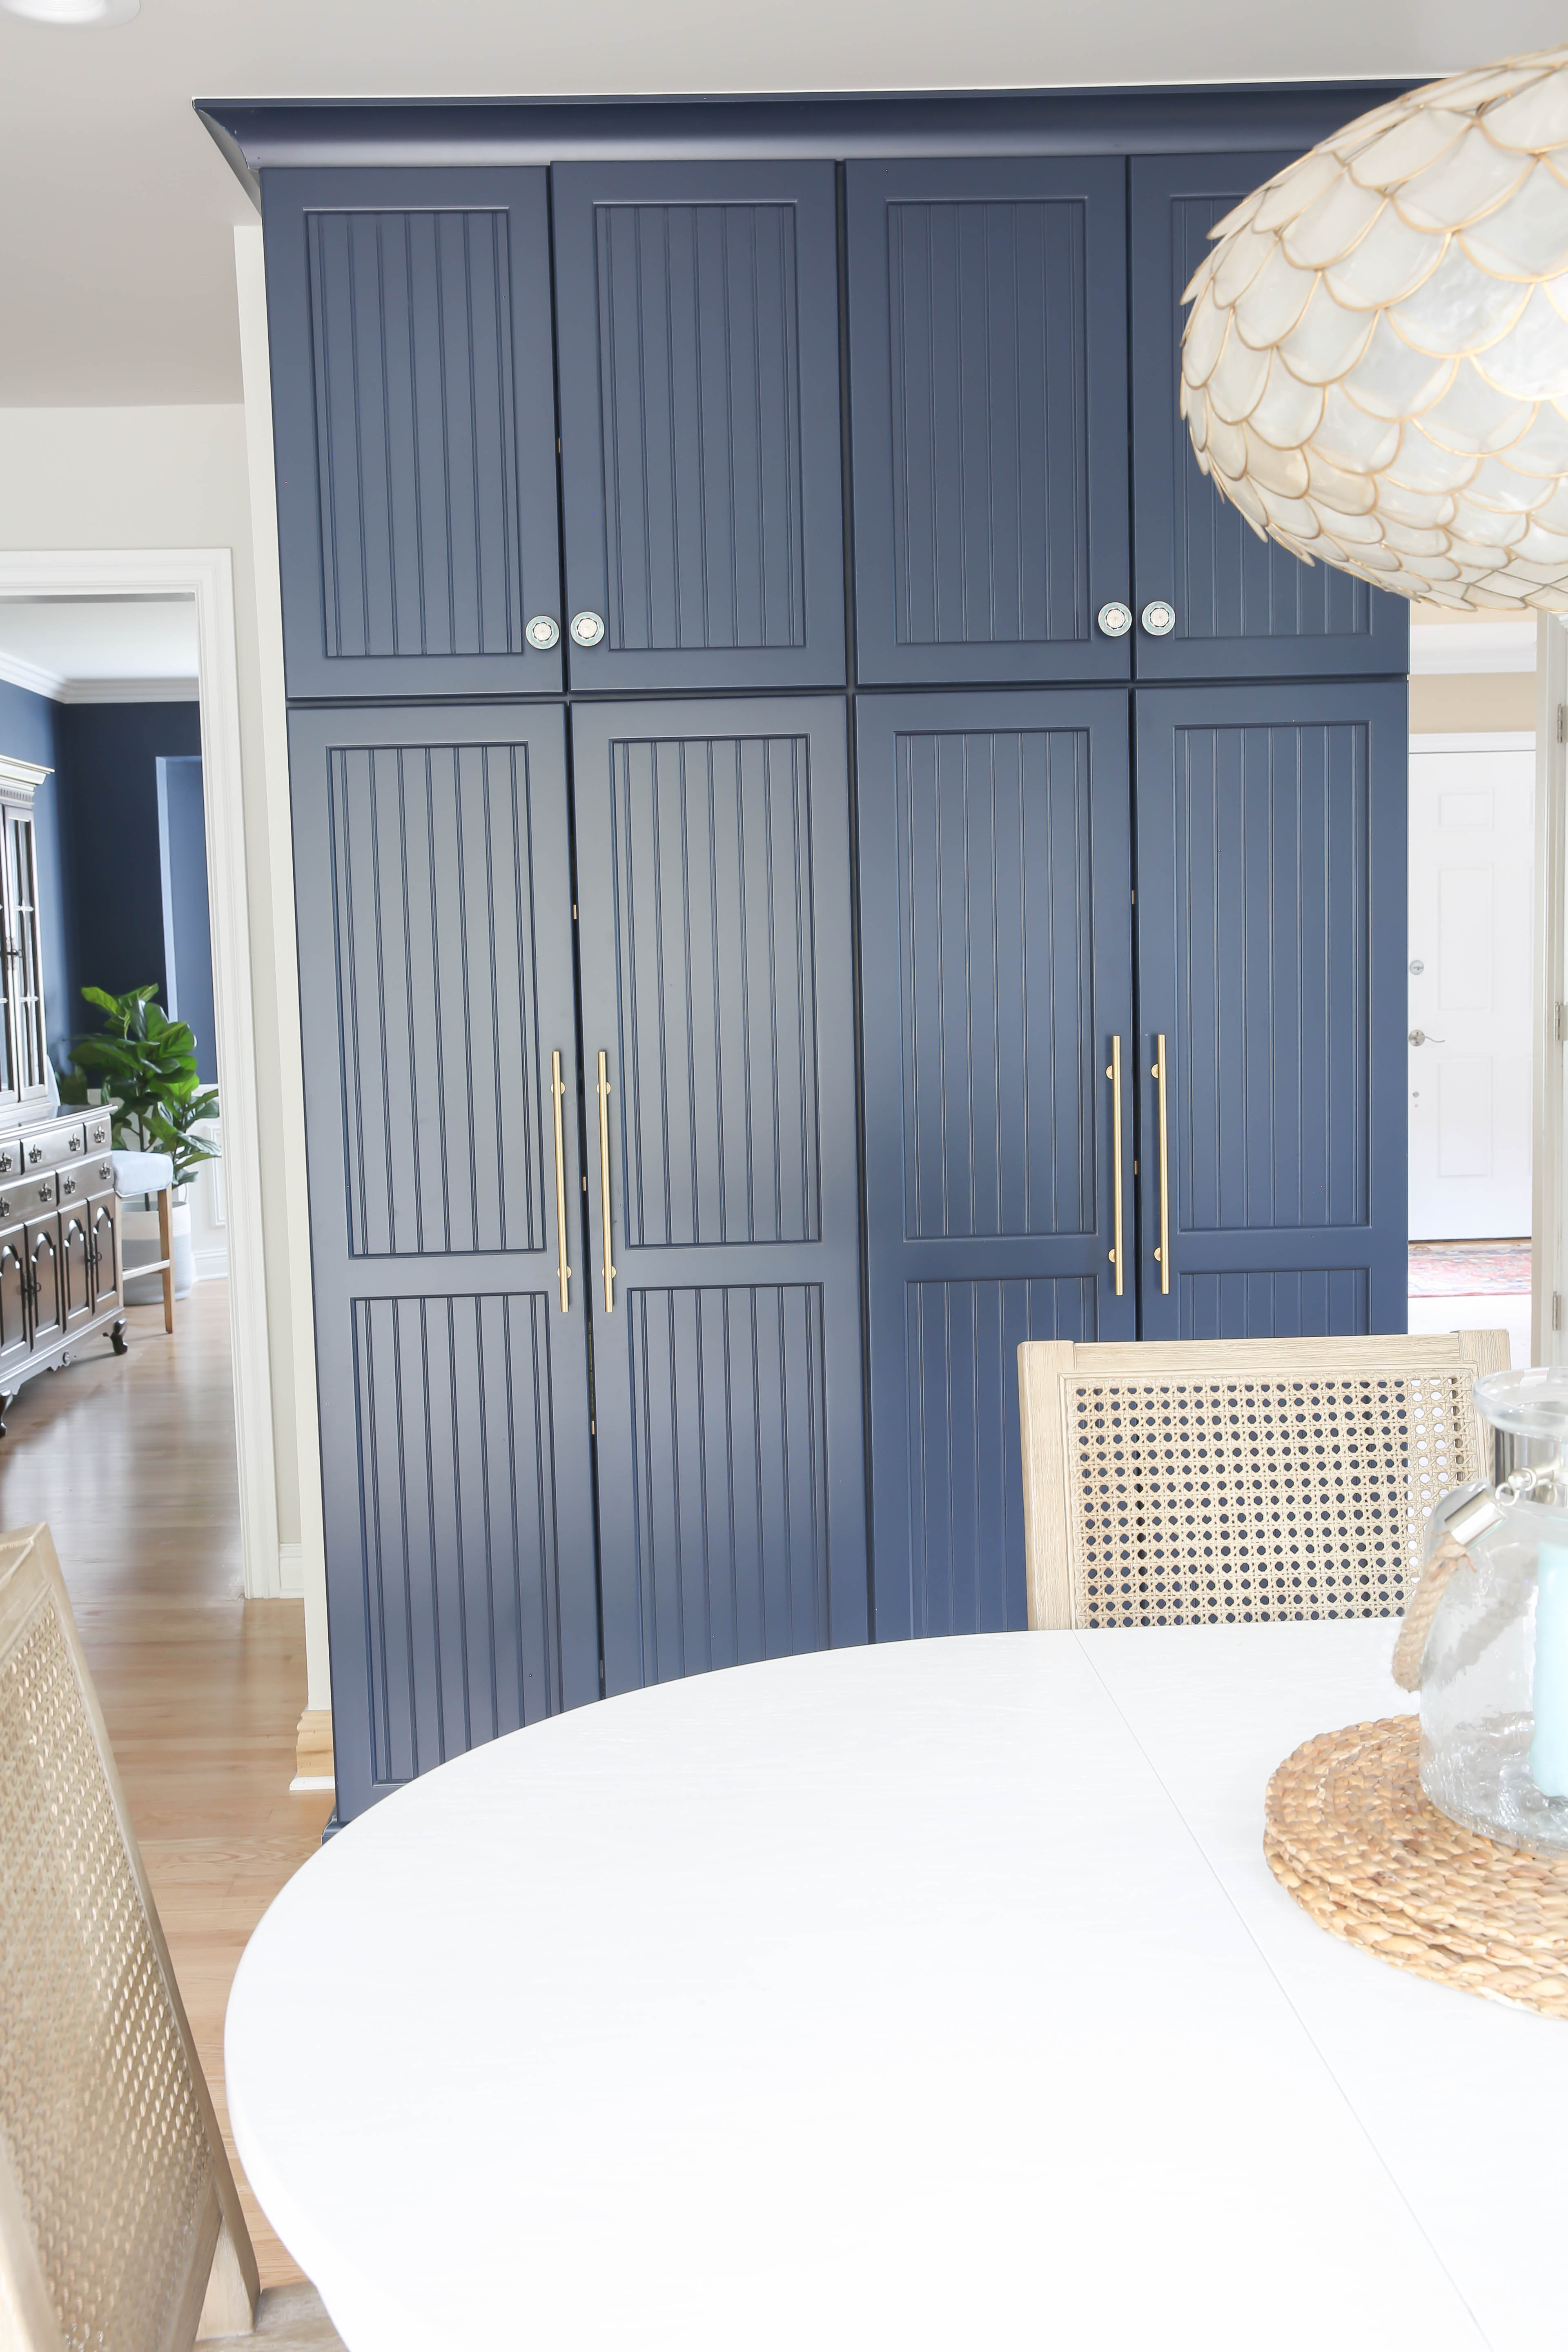 Classic White Kitchen Remodel with Navy Blue Pantry Cabinets | Newport Lane